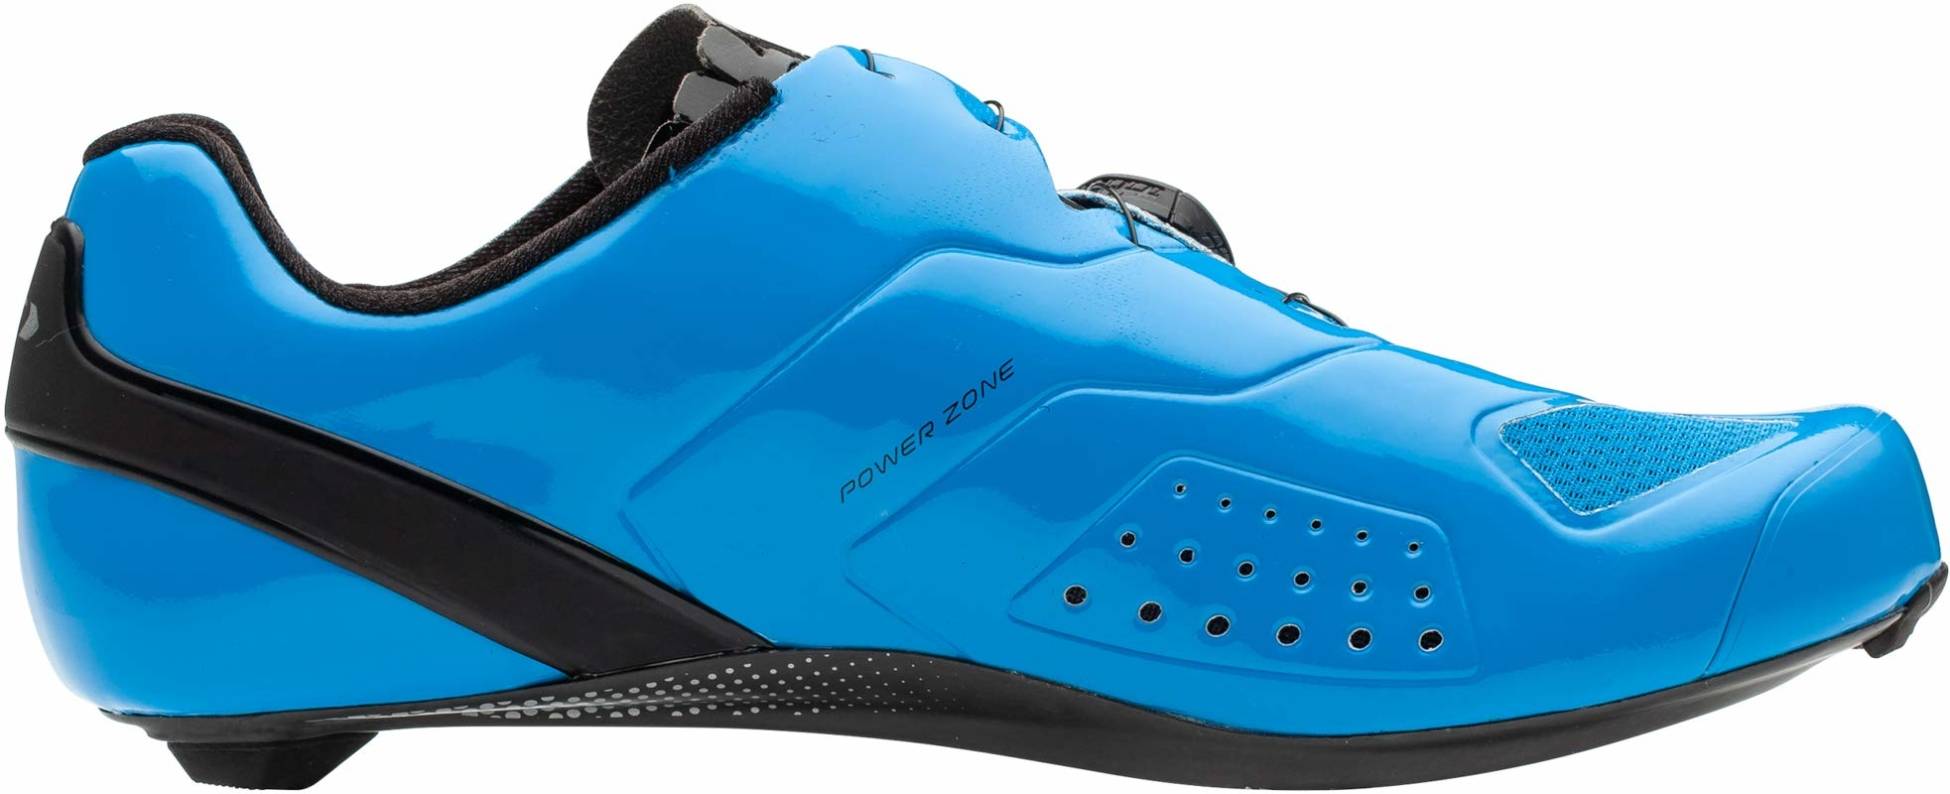 Save 37% on Blue Cycling Shoes (22 